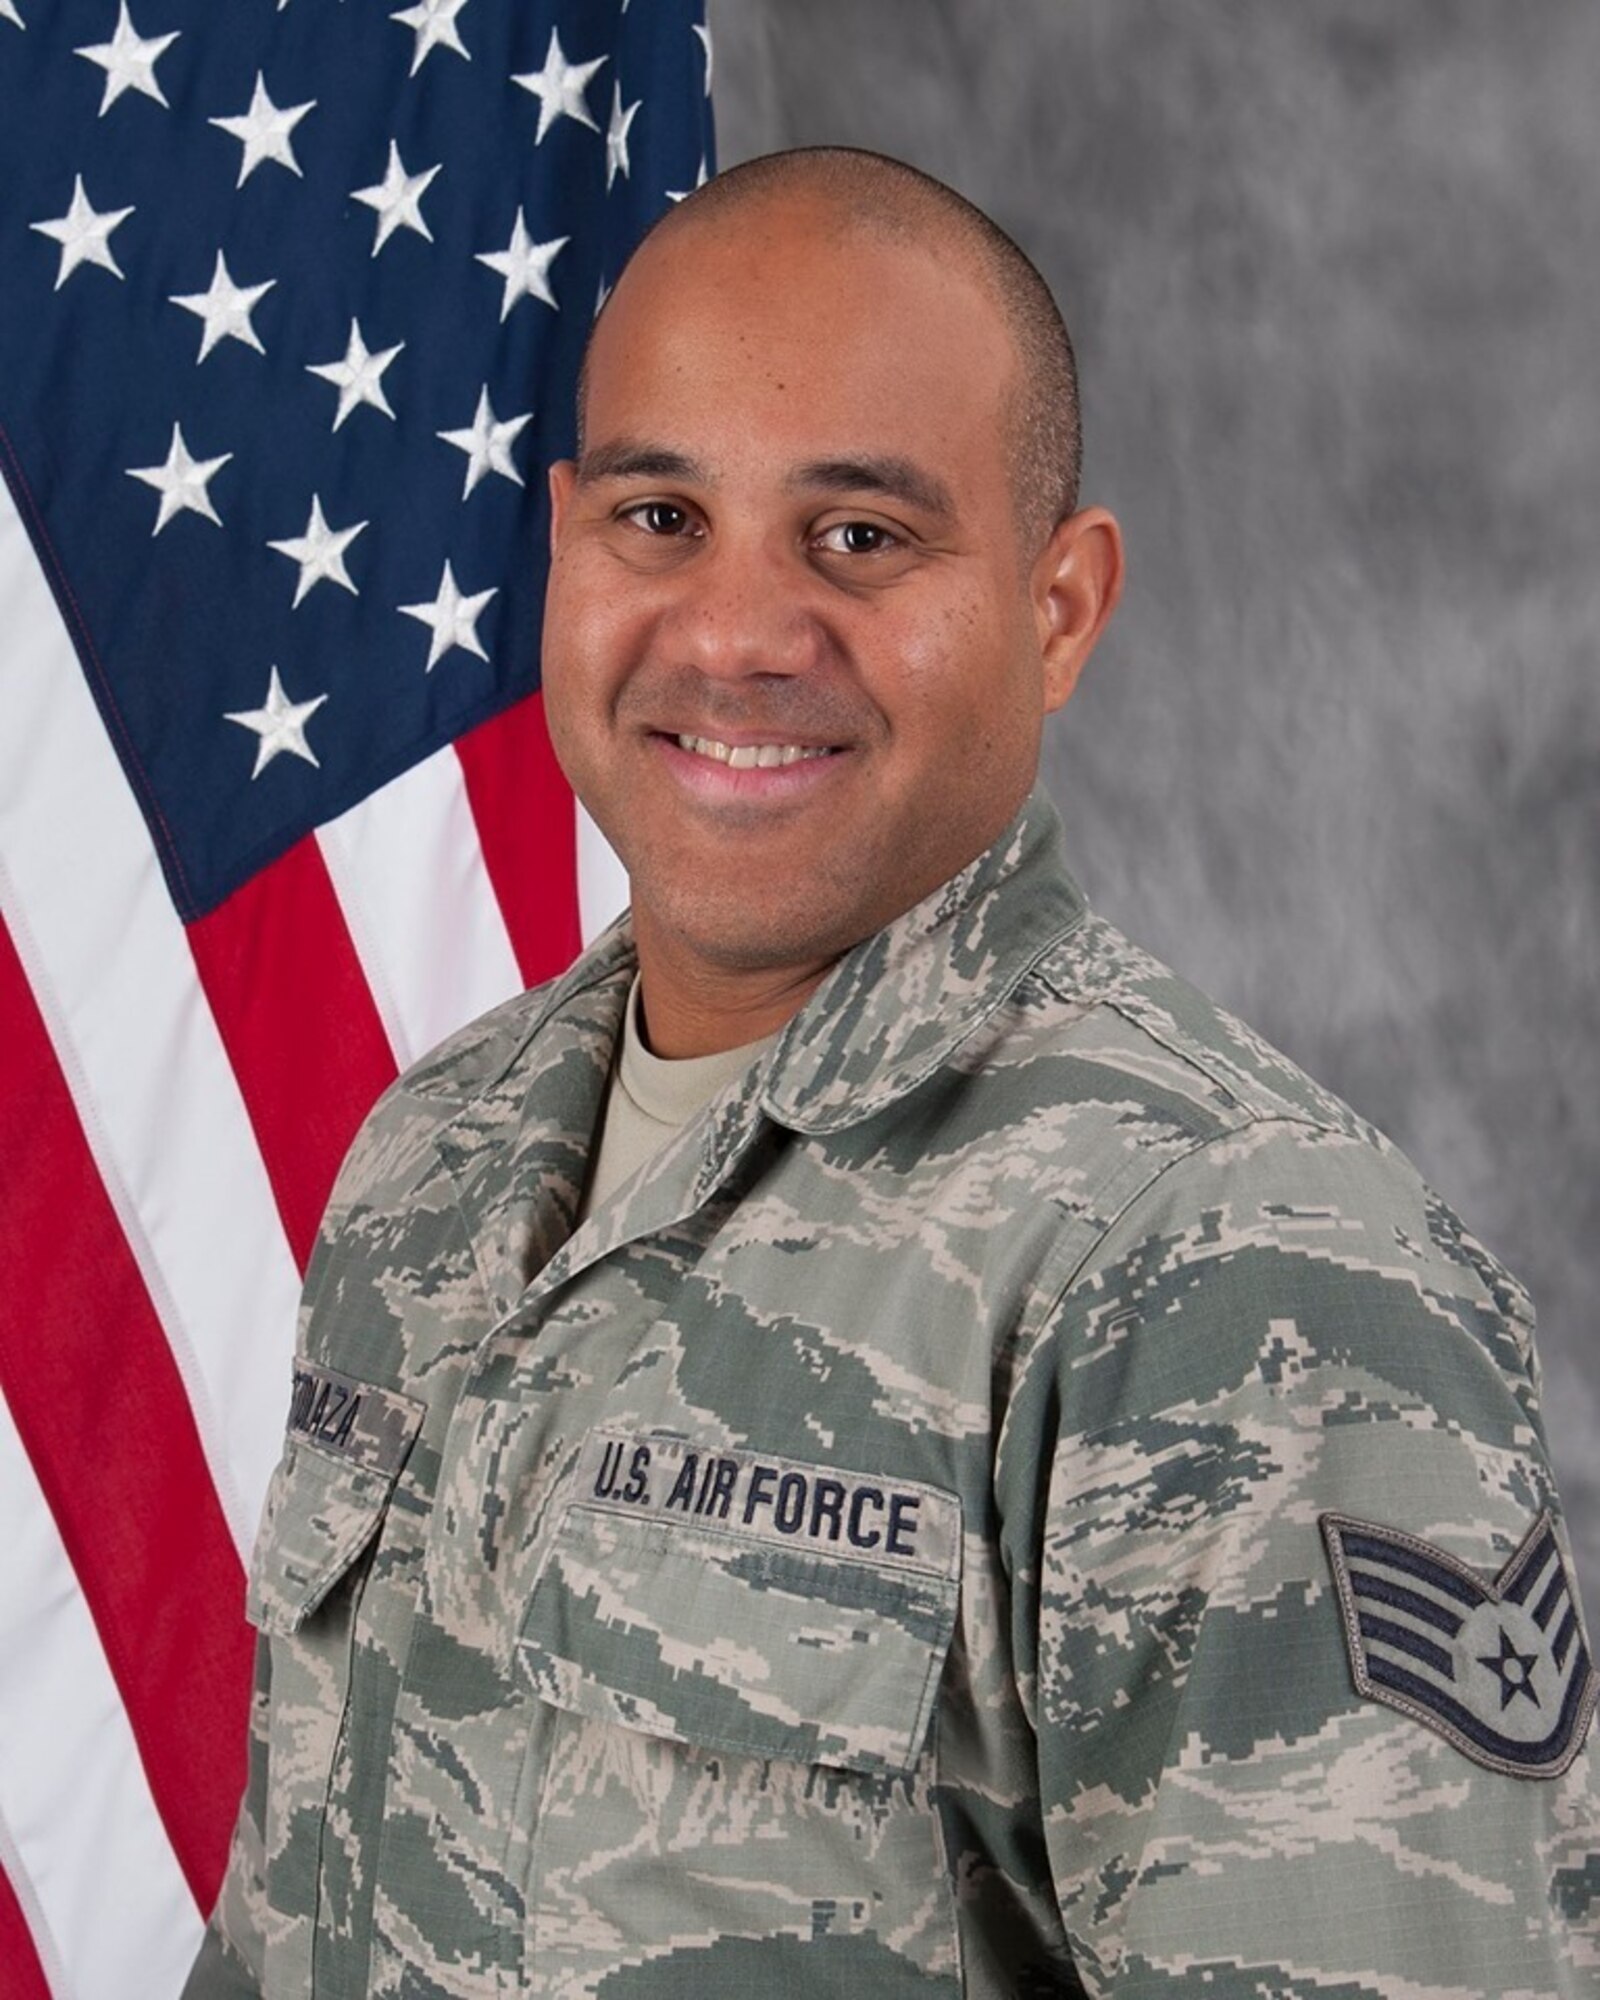 The 149th Fighter Wing’s Military Equal Opportunity Office, assigned to the Texas Air National Guard, is recognizing U.S. Air Force Staff Sgt. Cesar Ostolaza during National Hispanic Heritage Month, which is observed every year from Sept. 15 - Oct. 15.